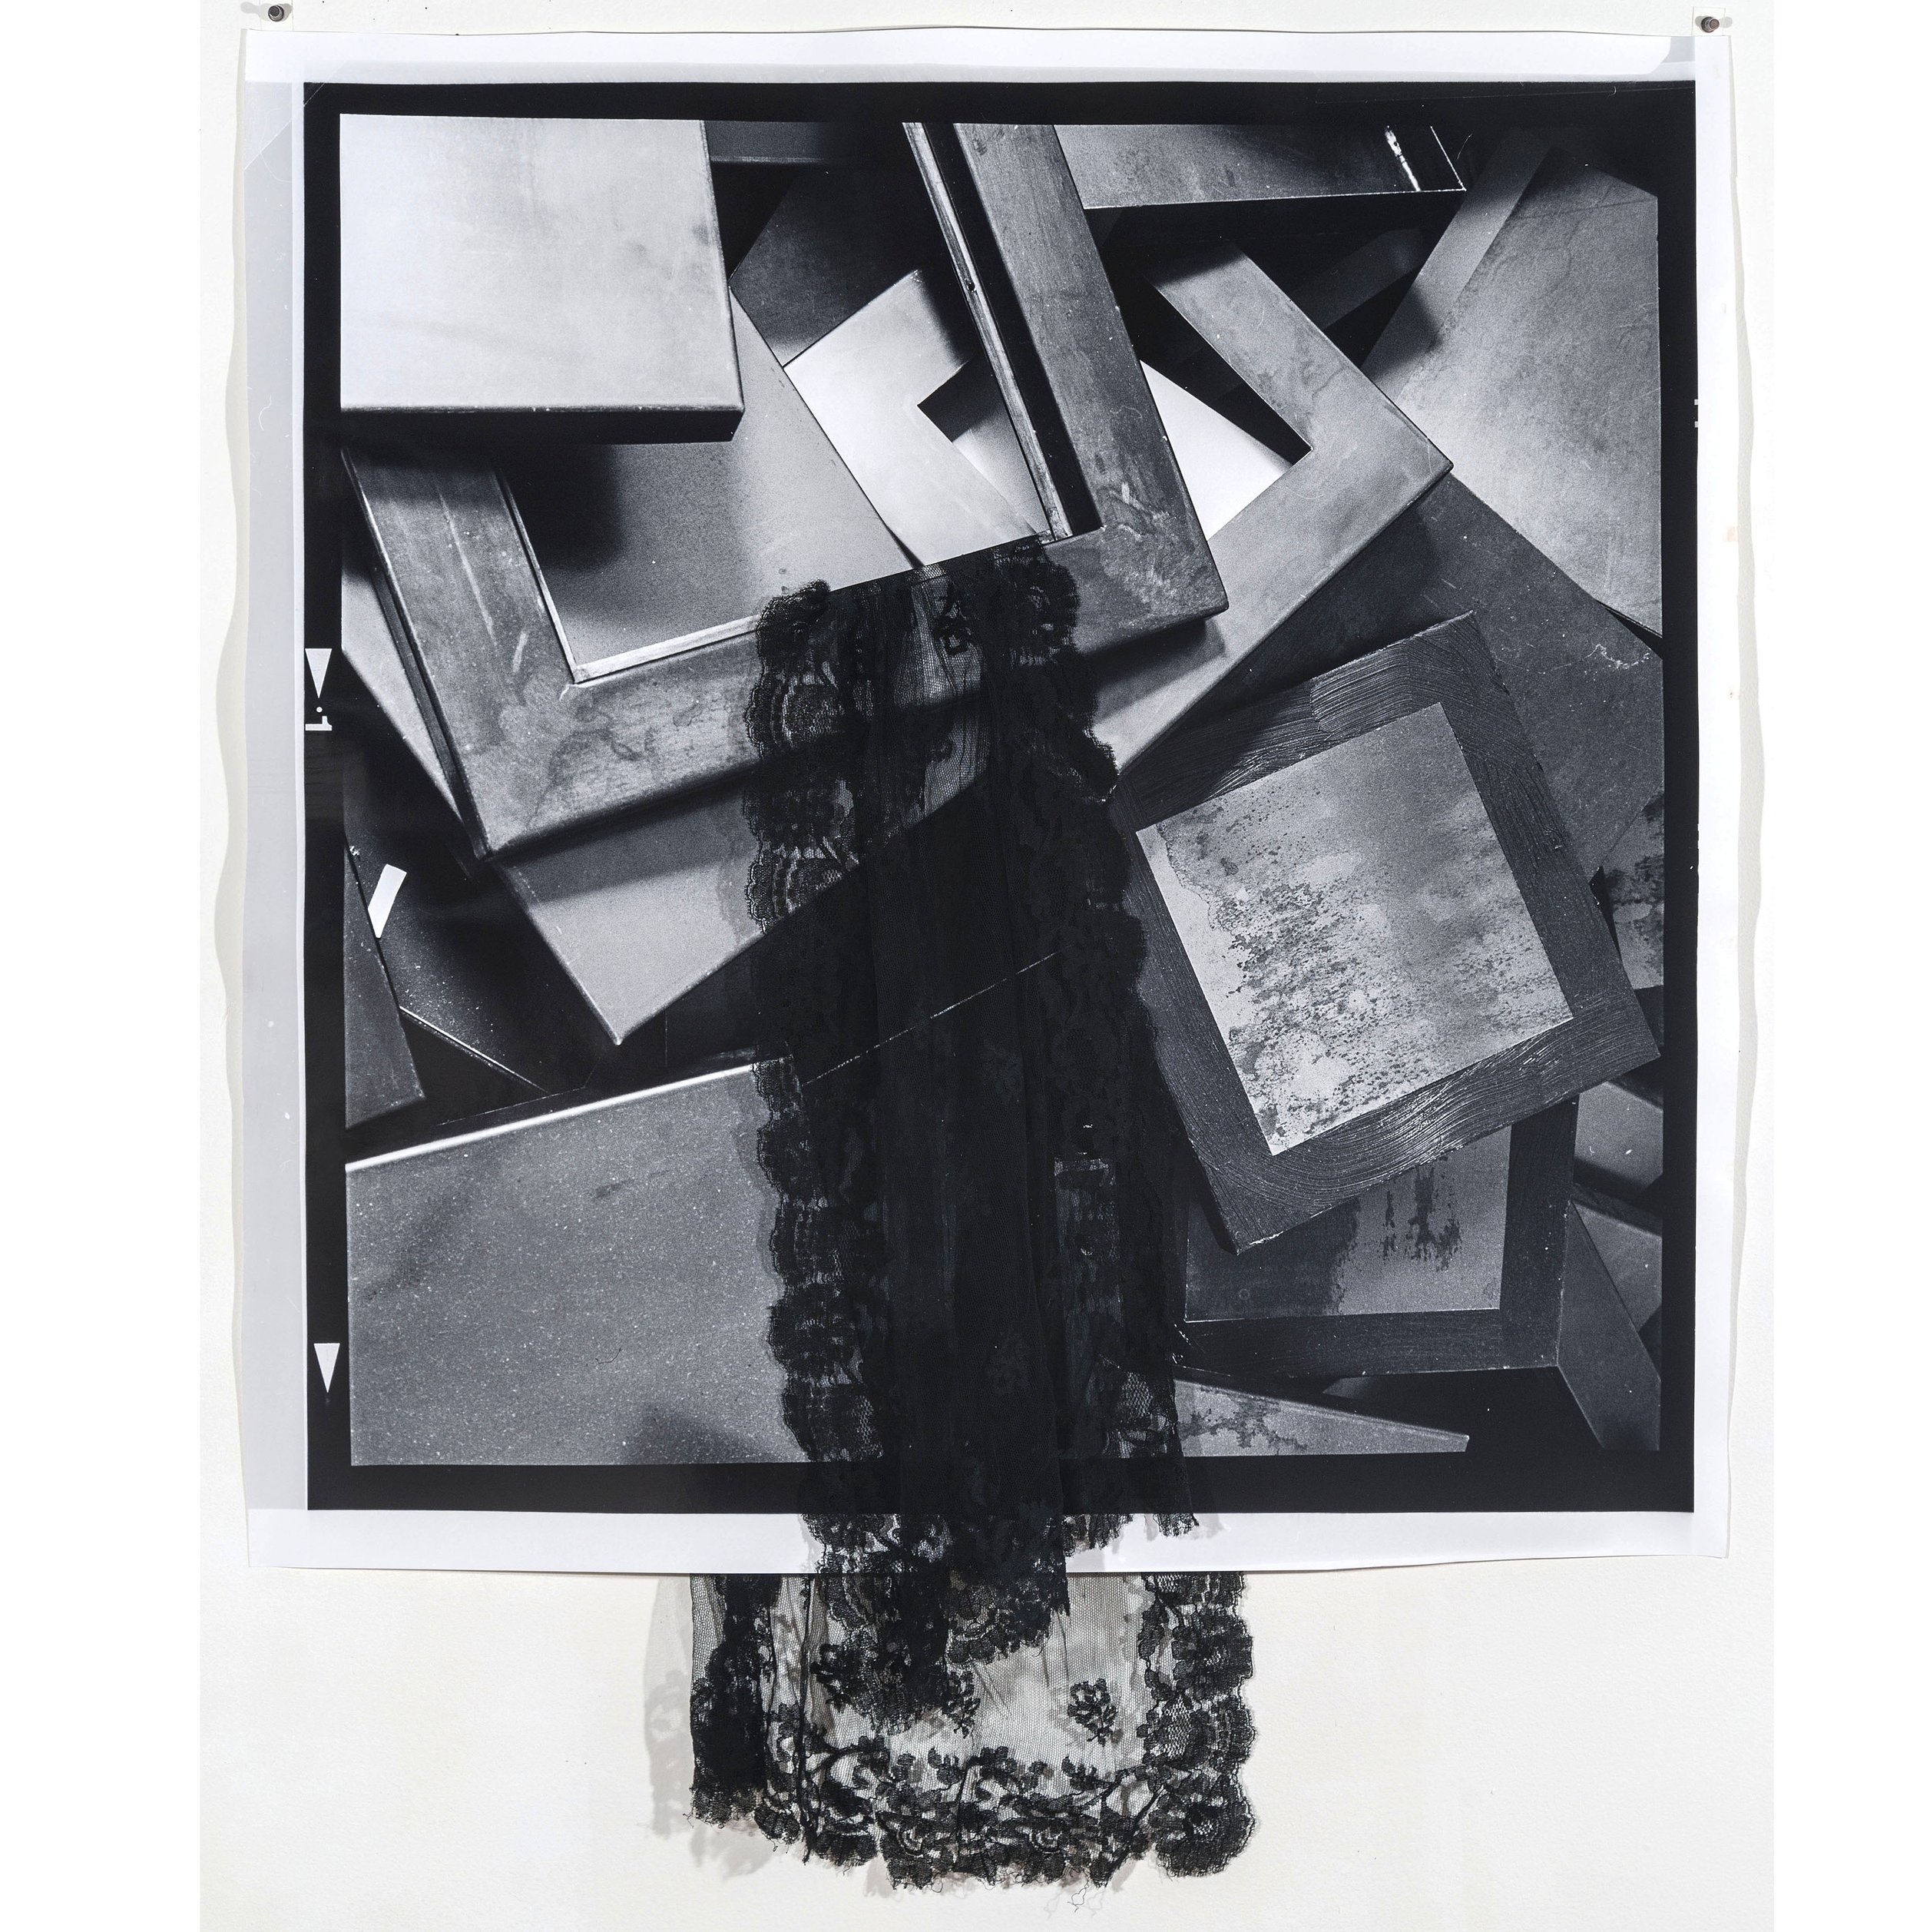  #1    2011-2015   Collaged Selenium toned silver gelatin prints with Spanish lace mantilla and thread   34” x 34”    